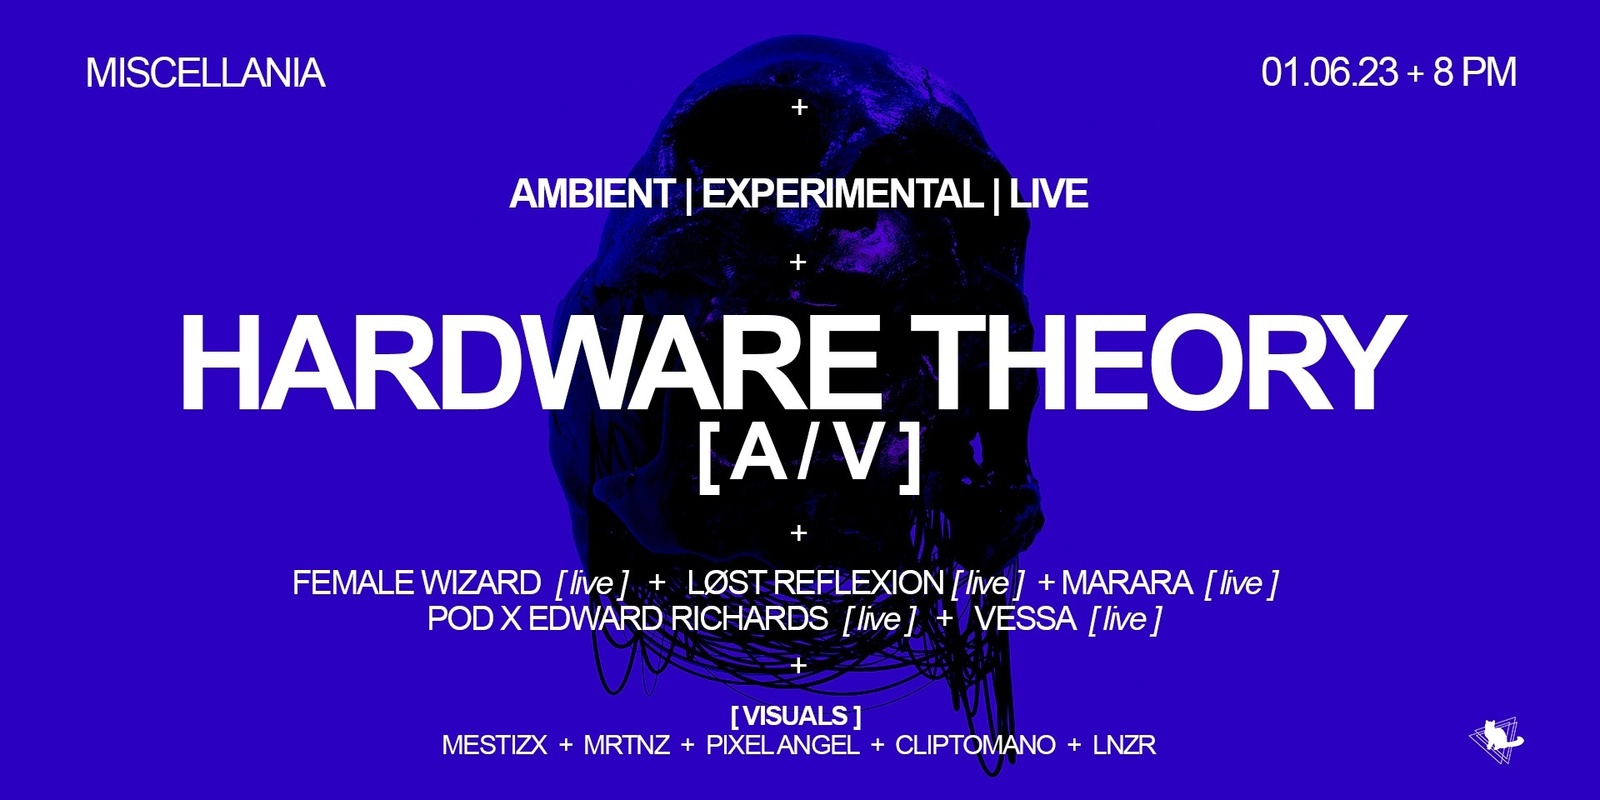 Hardware Theory [A/V] - LIVE/AMBIENT/EXPERIMENTAL